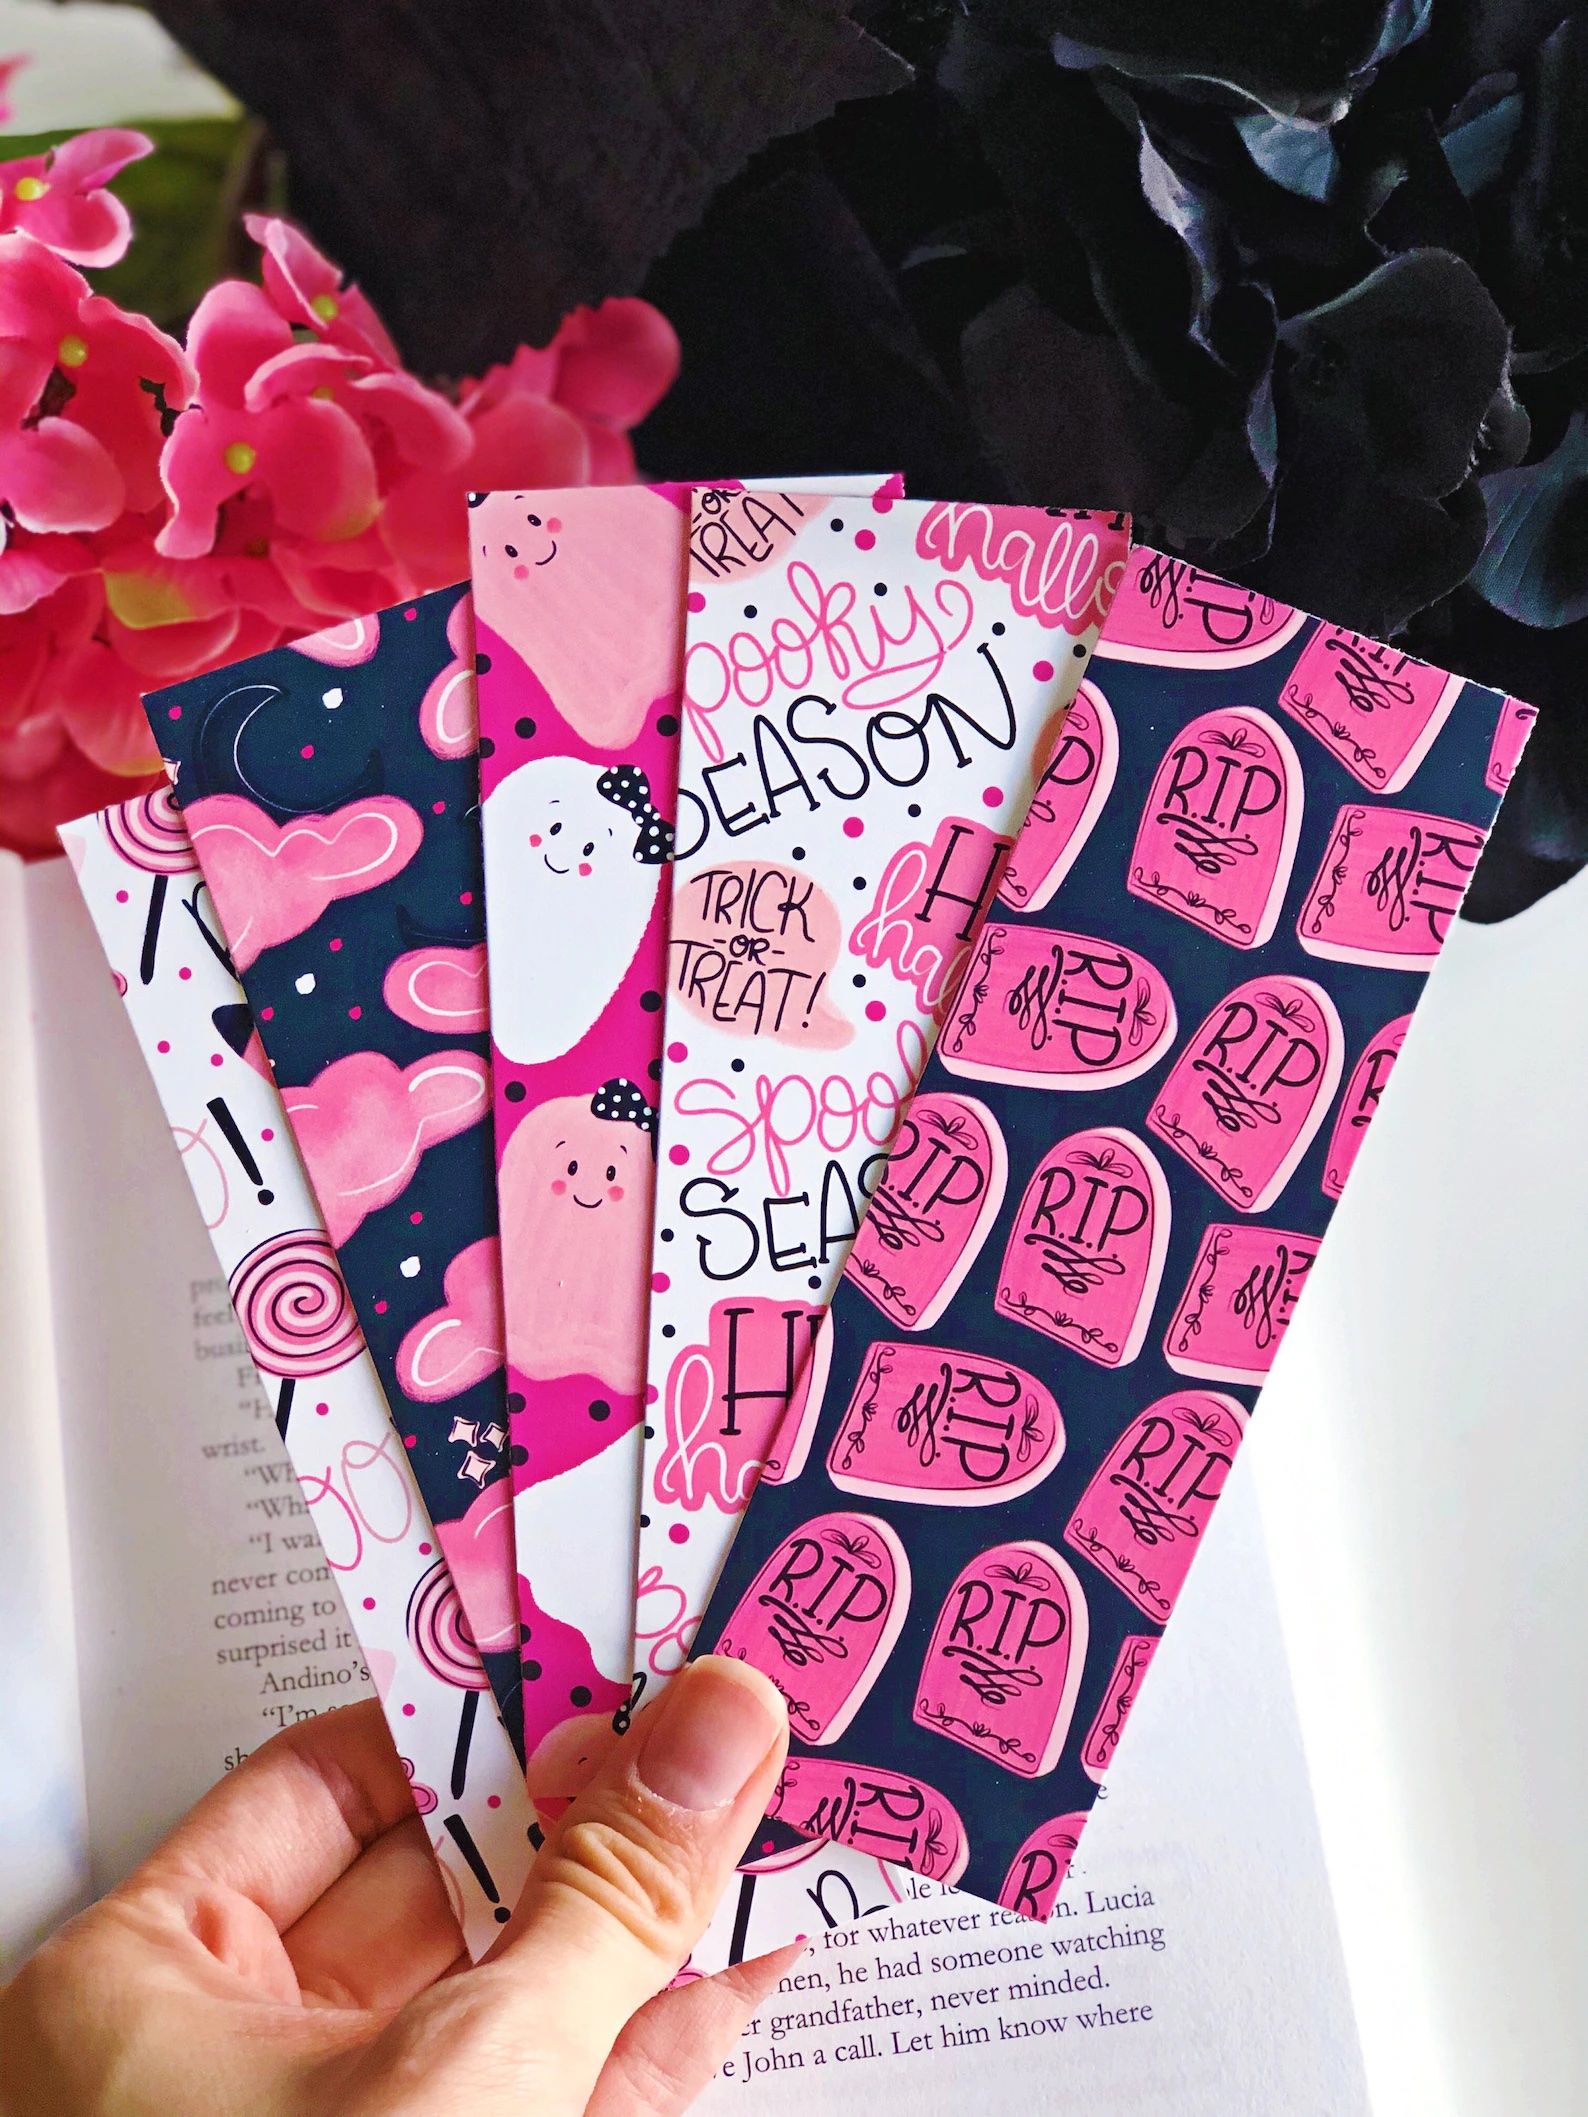 a collection of five pink, white, and navy blue bookmarks with spooky season and ghost motifs